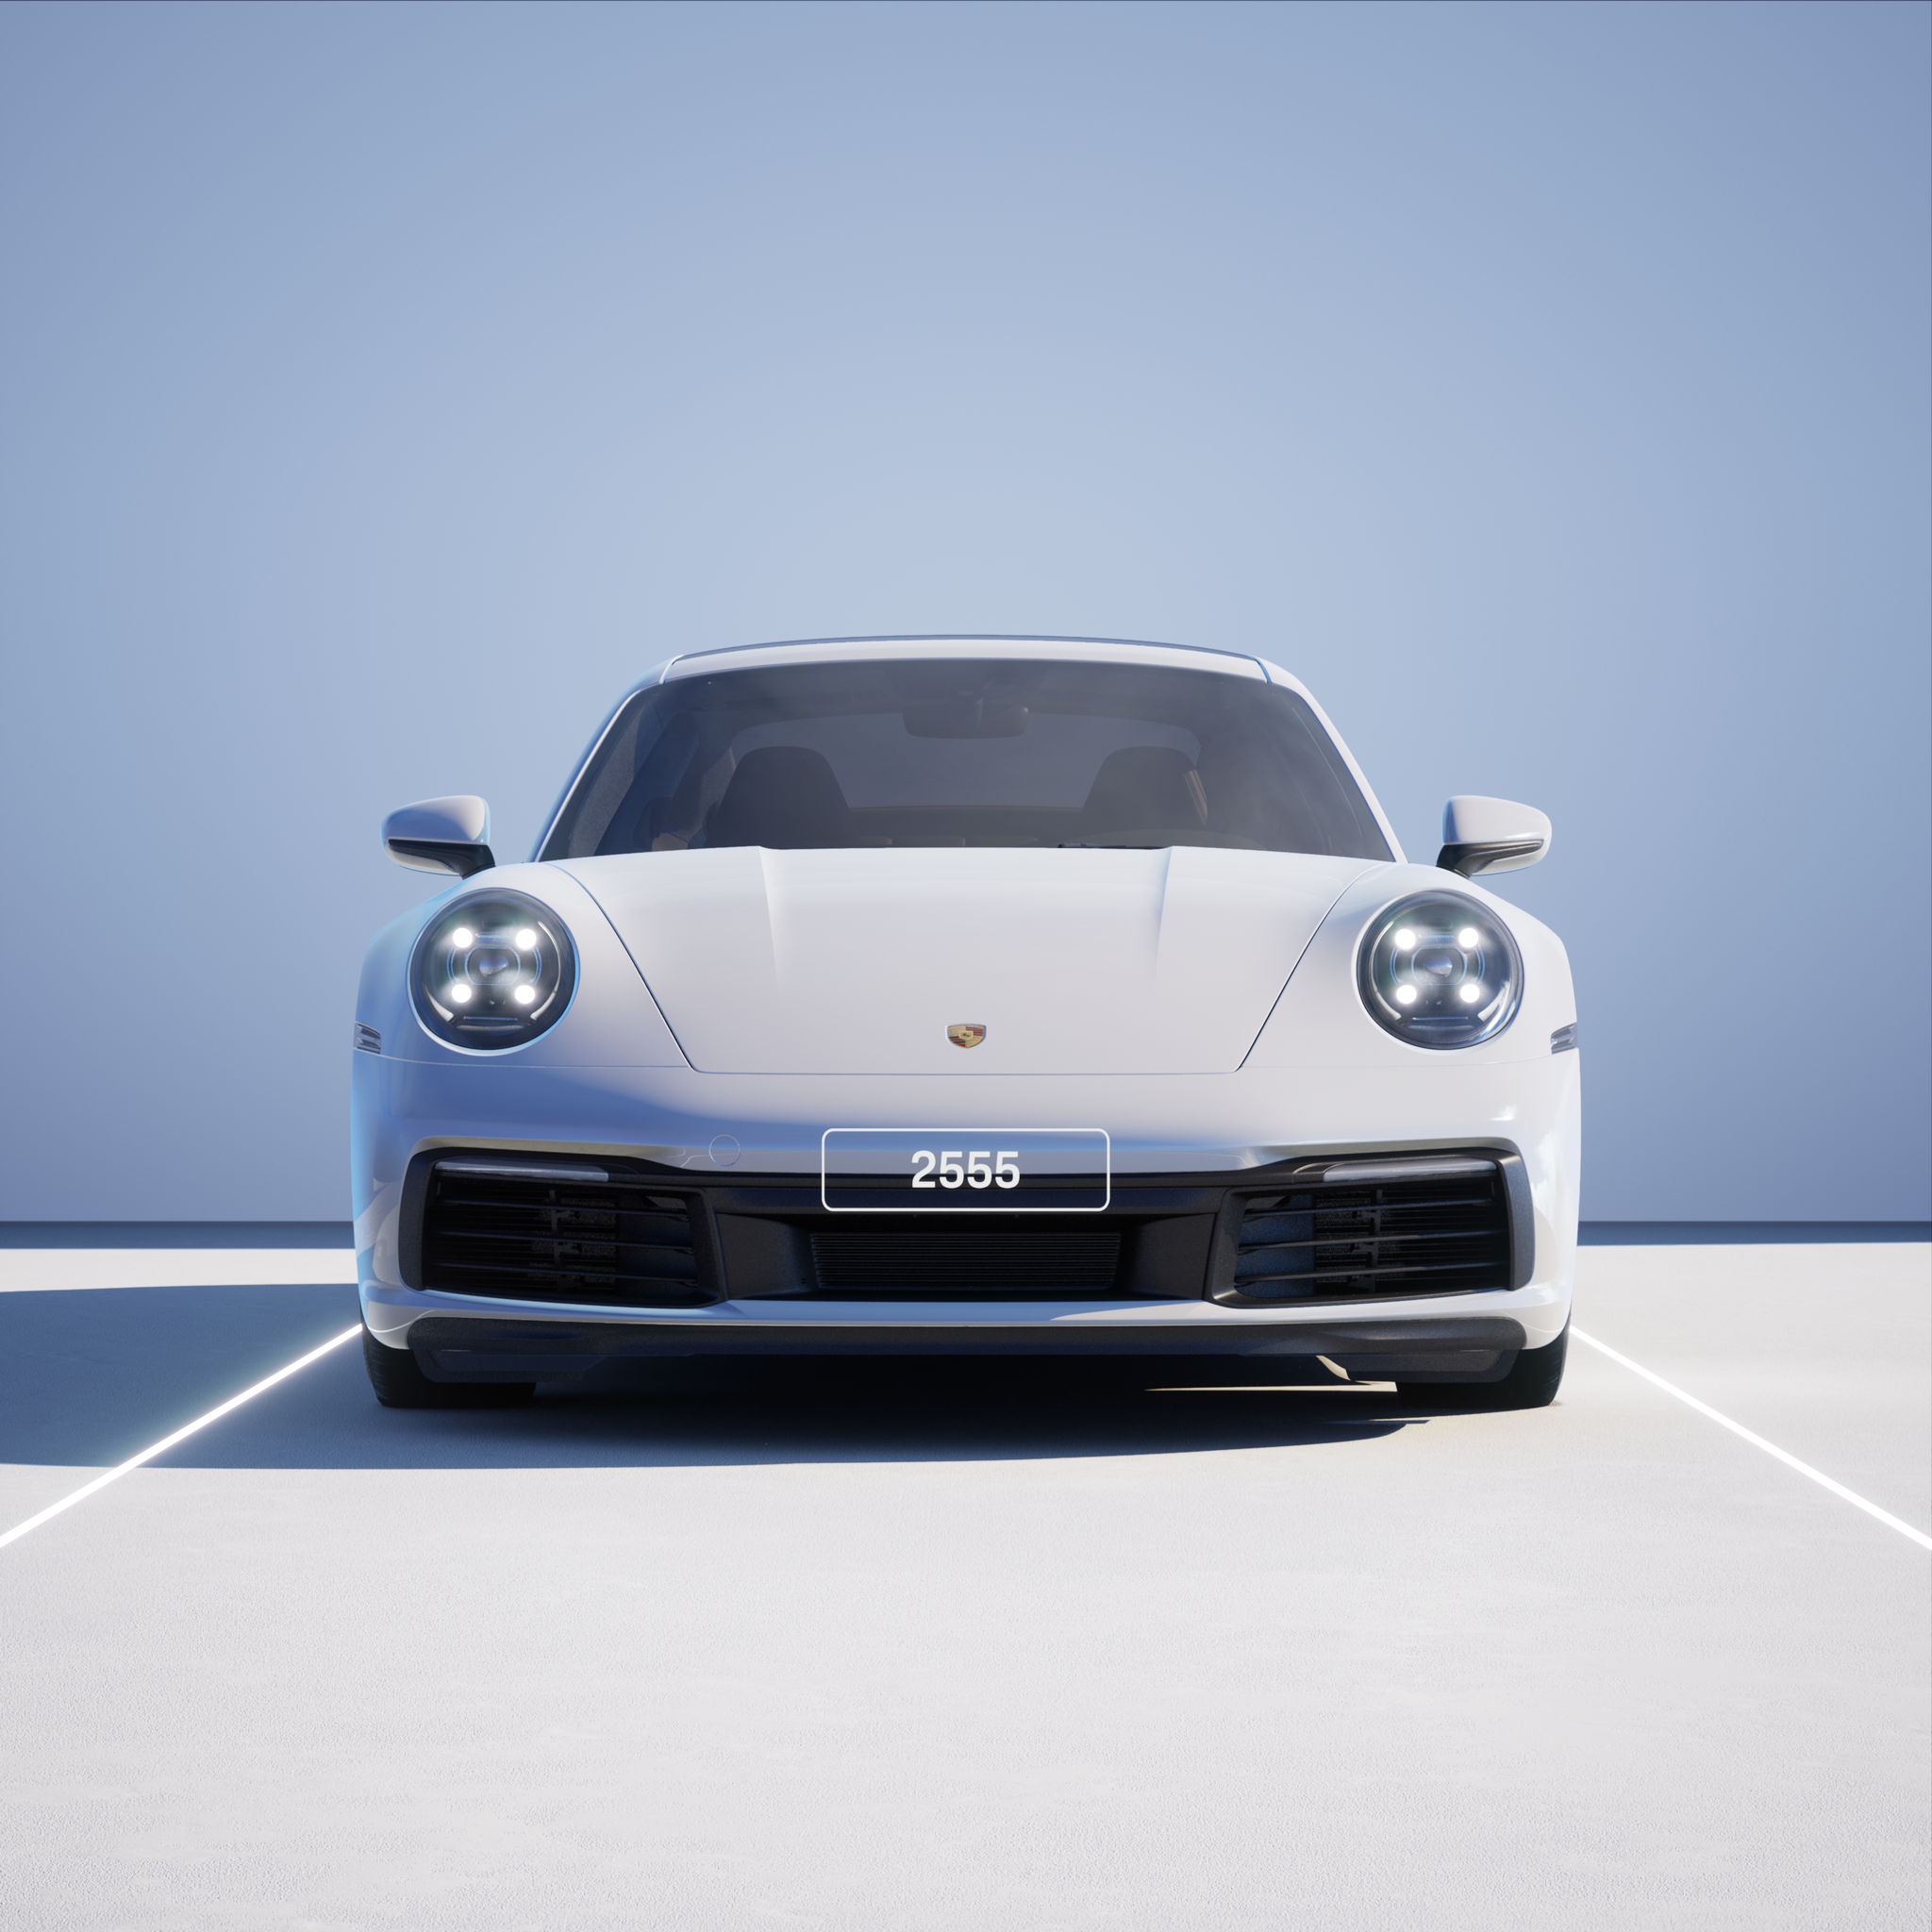 The PORSCHΞ 911 2555 image in phase